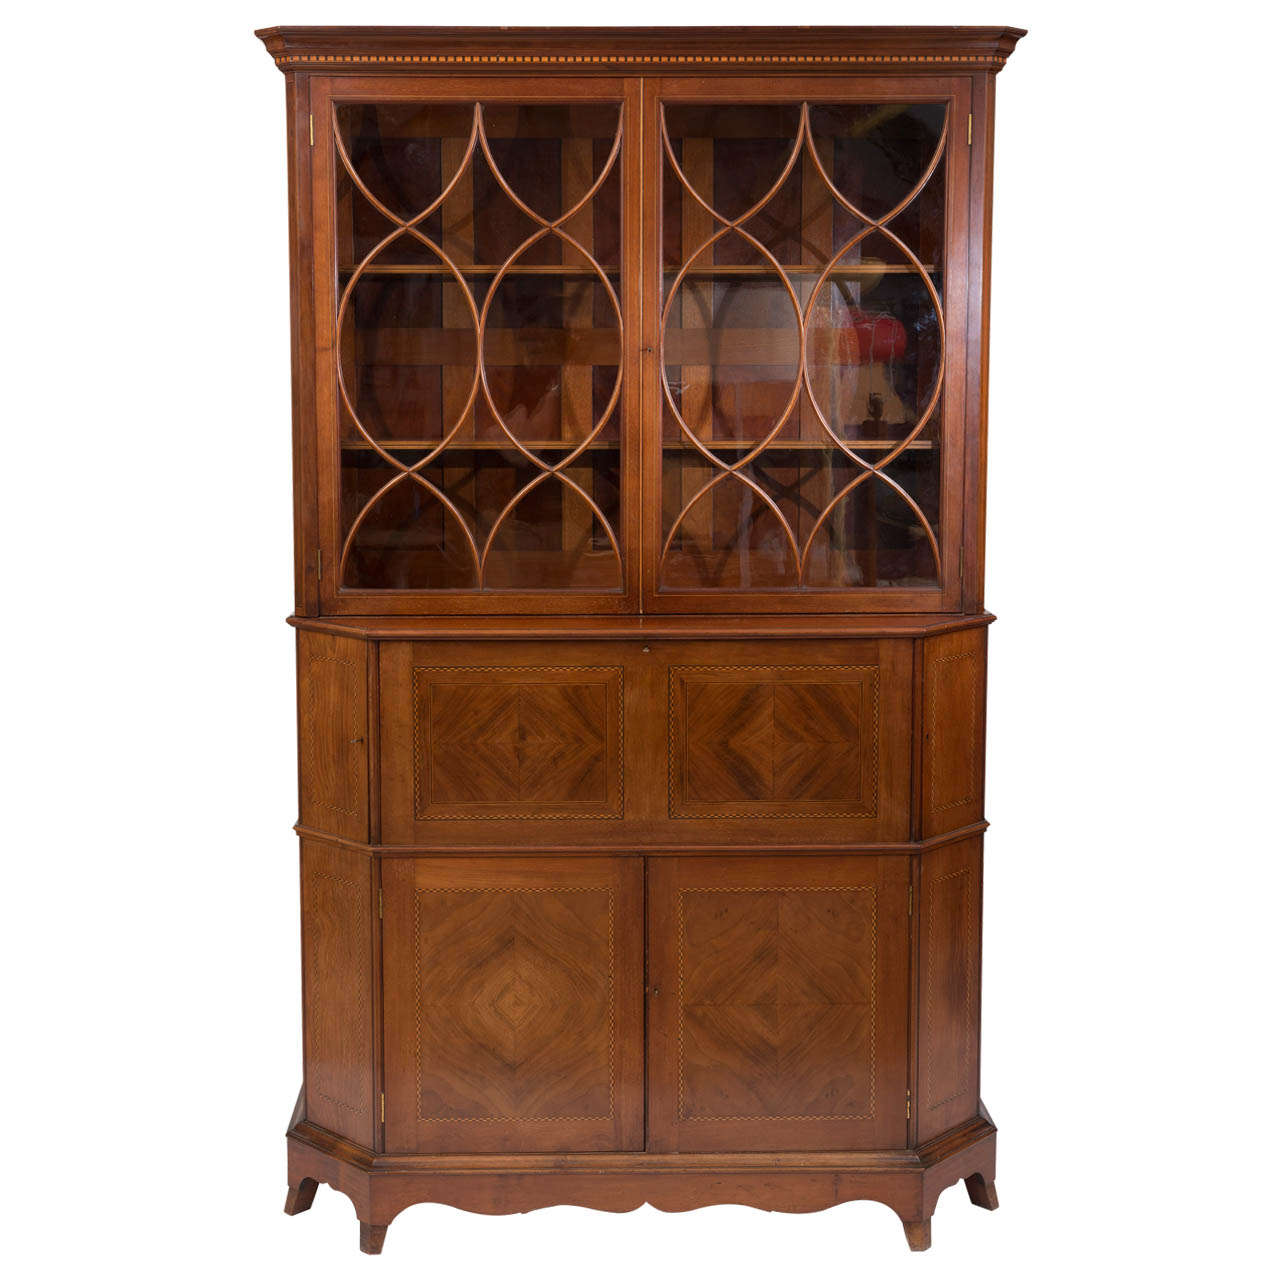 George Jack for Morris and co mahogany secretaire cabinet, England circa 1895 For Sale